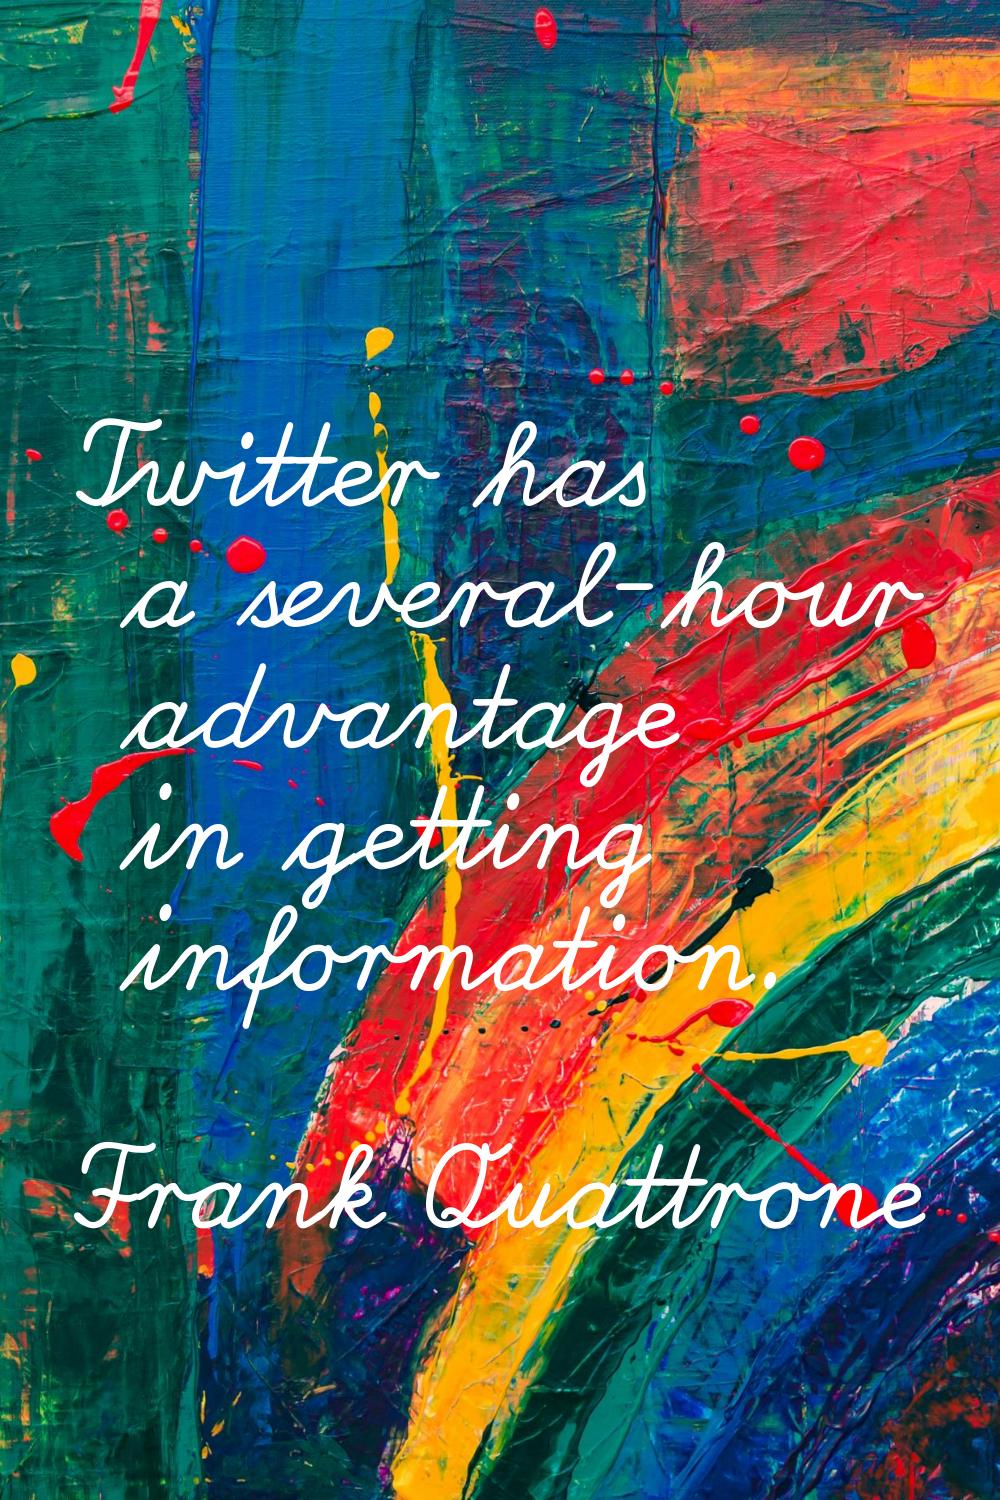 Twitter has a several-hour advantage in getting information.